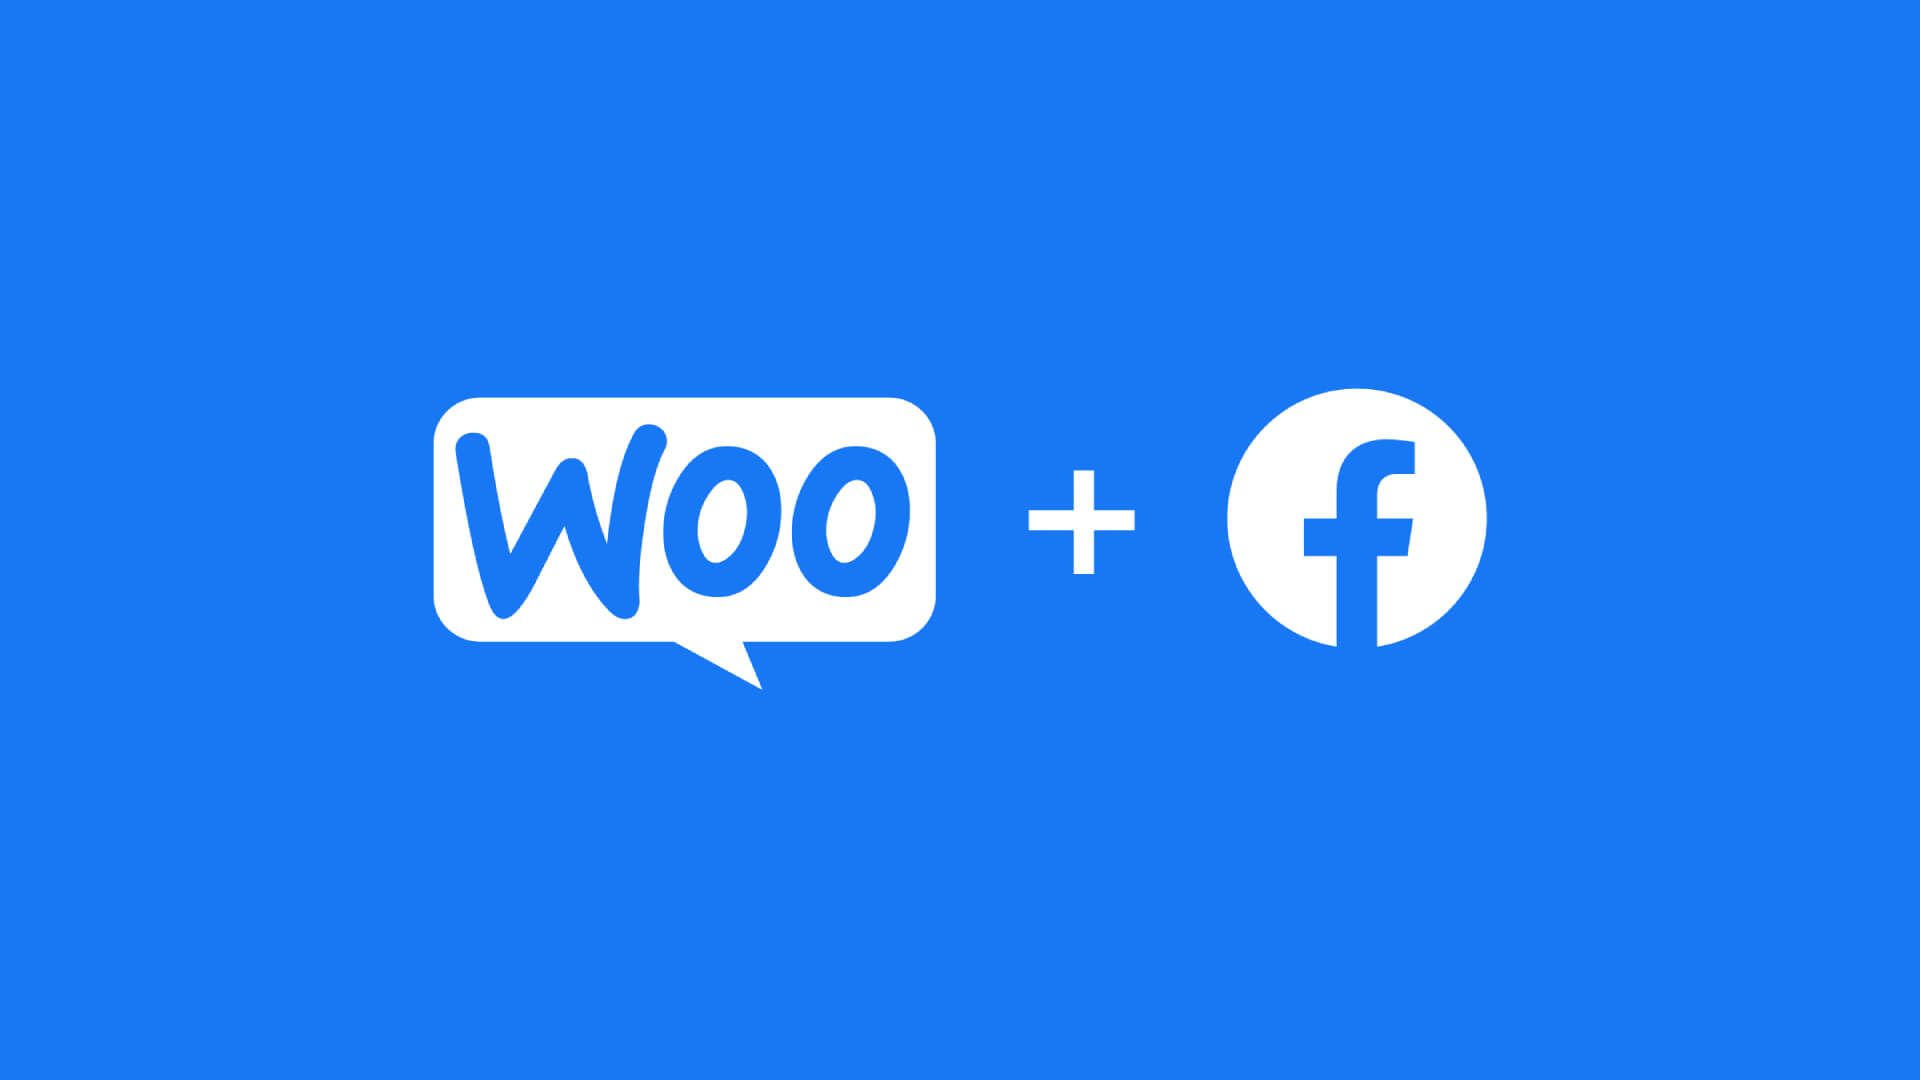 WooCommerce and Facebook integration